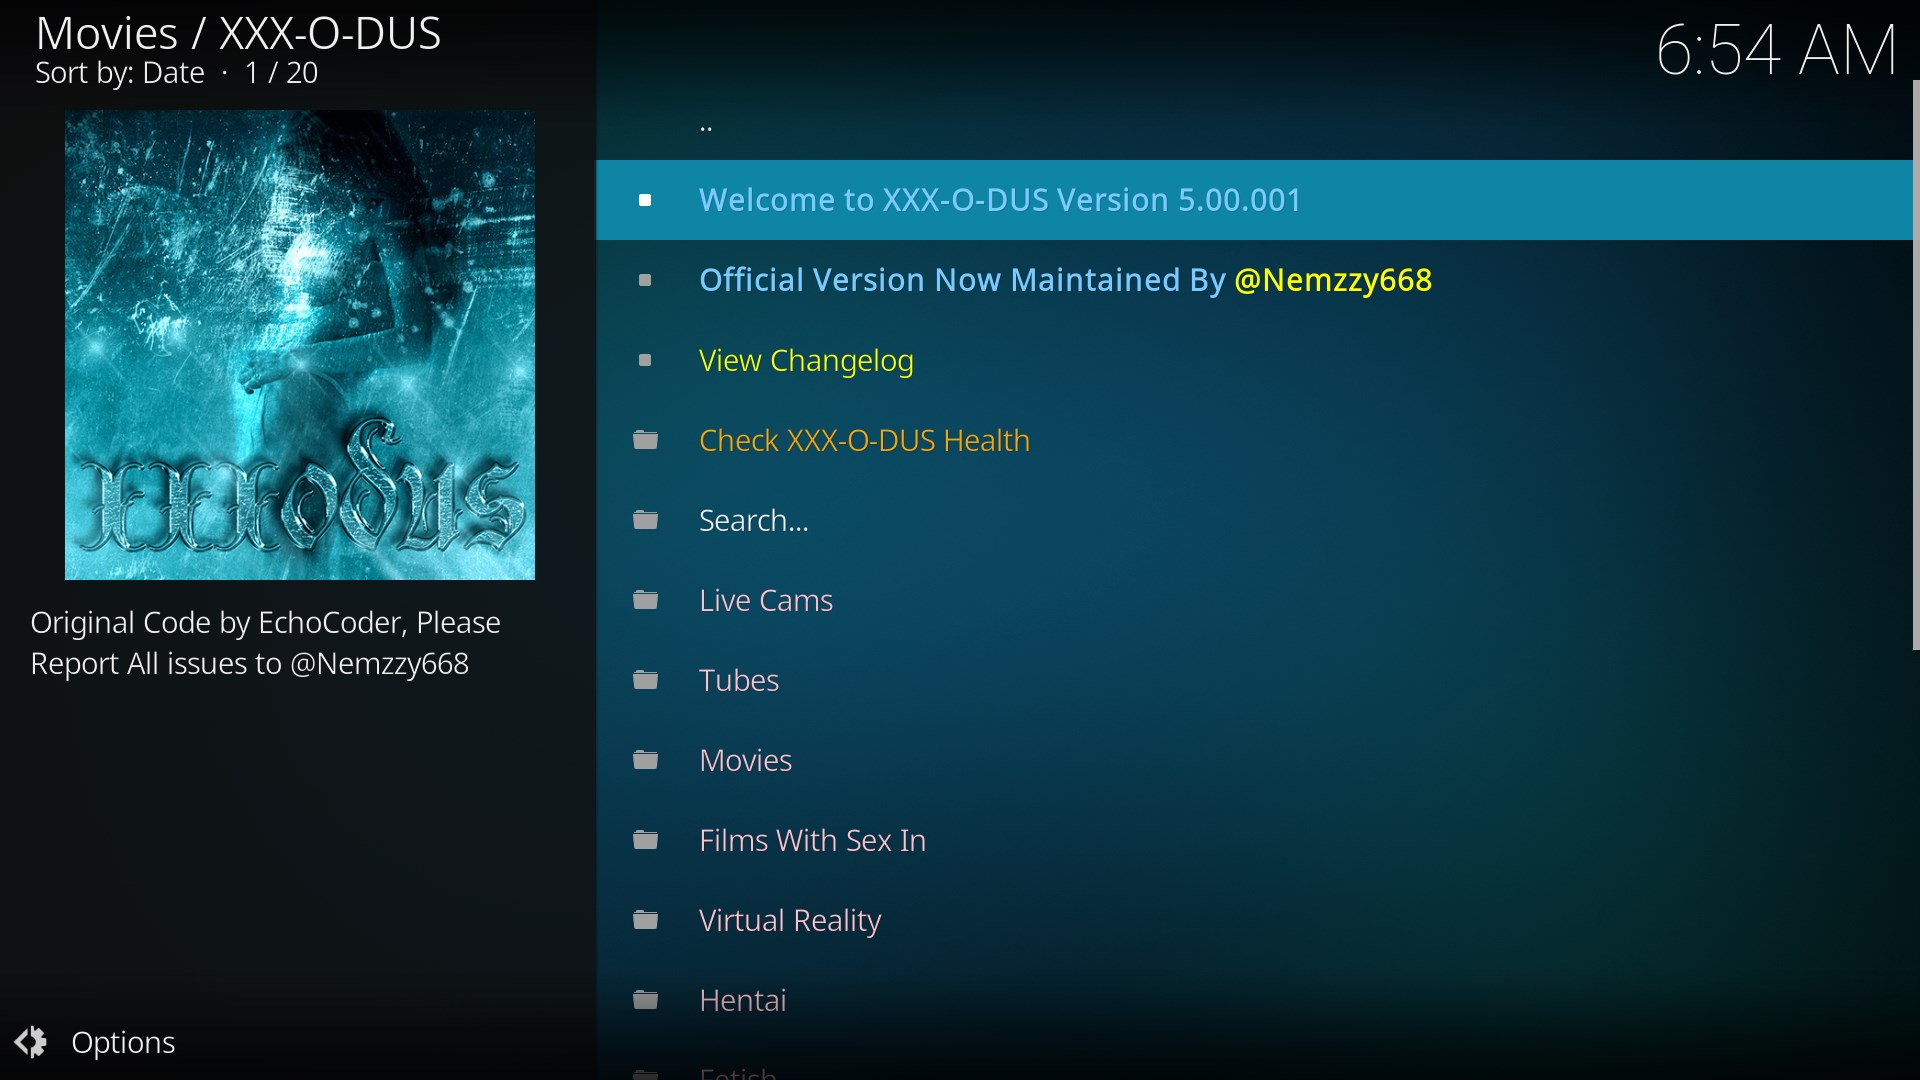 how to download from kodi xxx-o-dus